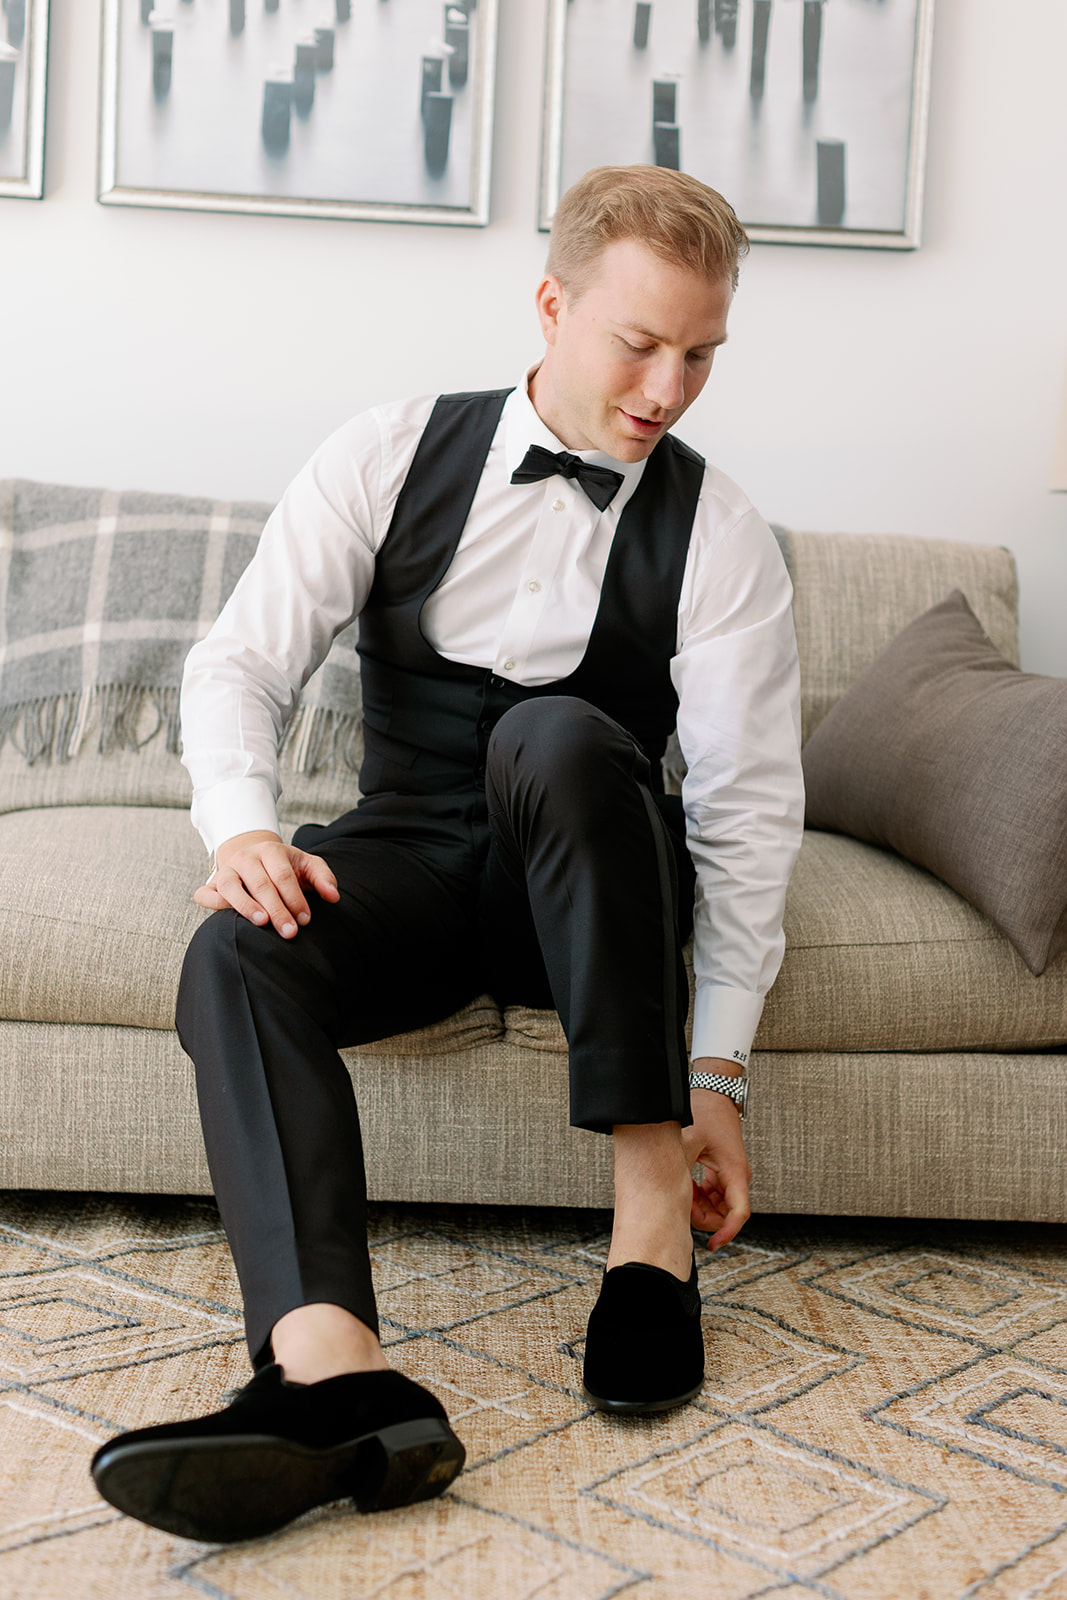 Groom readies for the big day, a candid portrait as he sits on a couch, putting on his shoes.